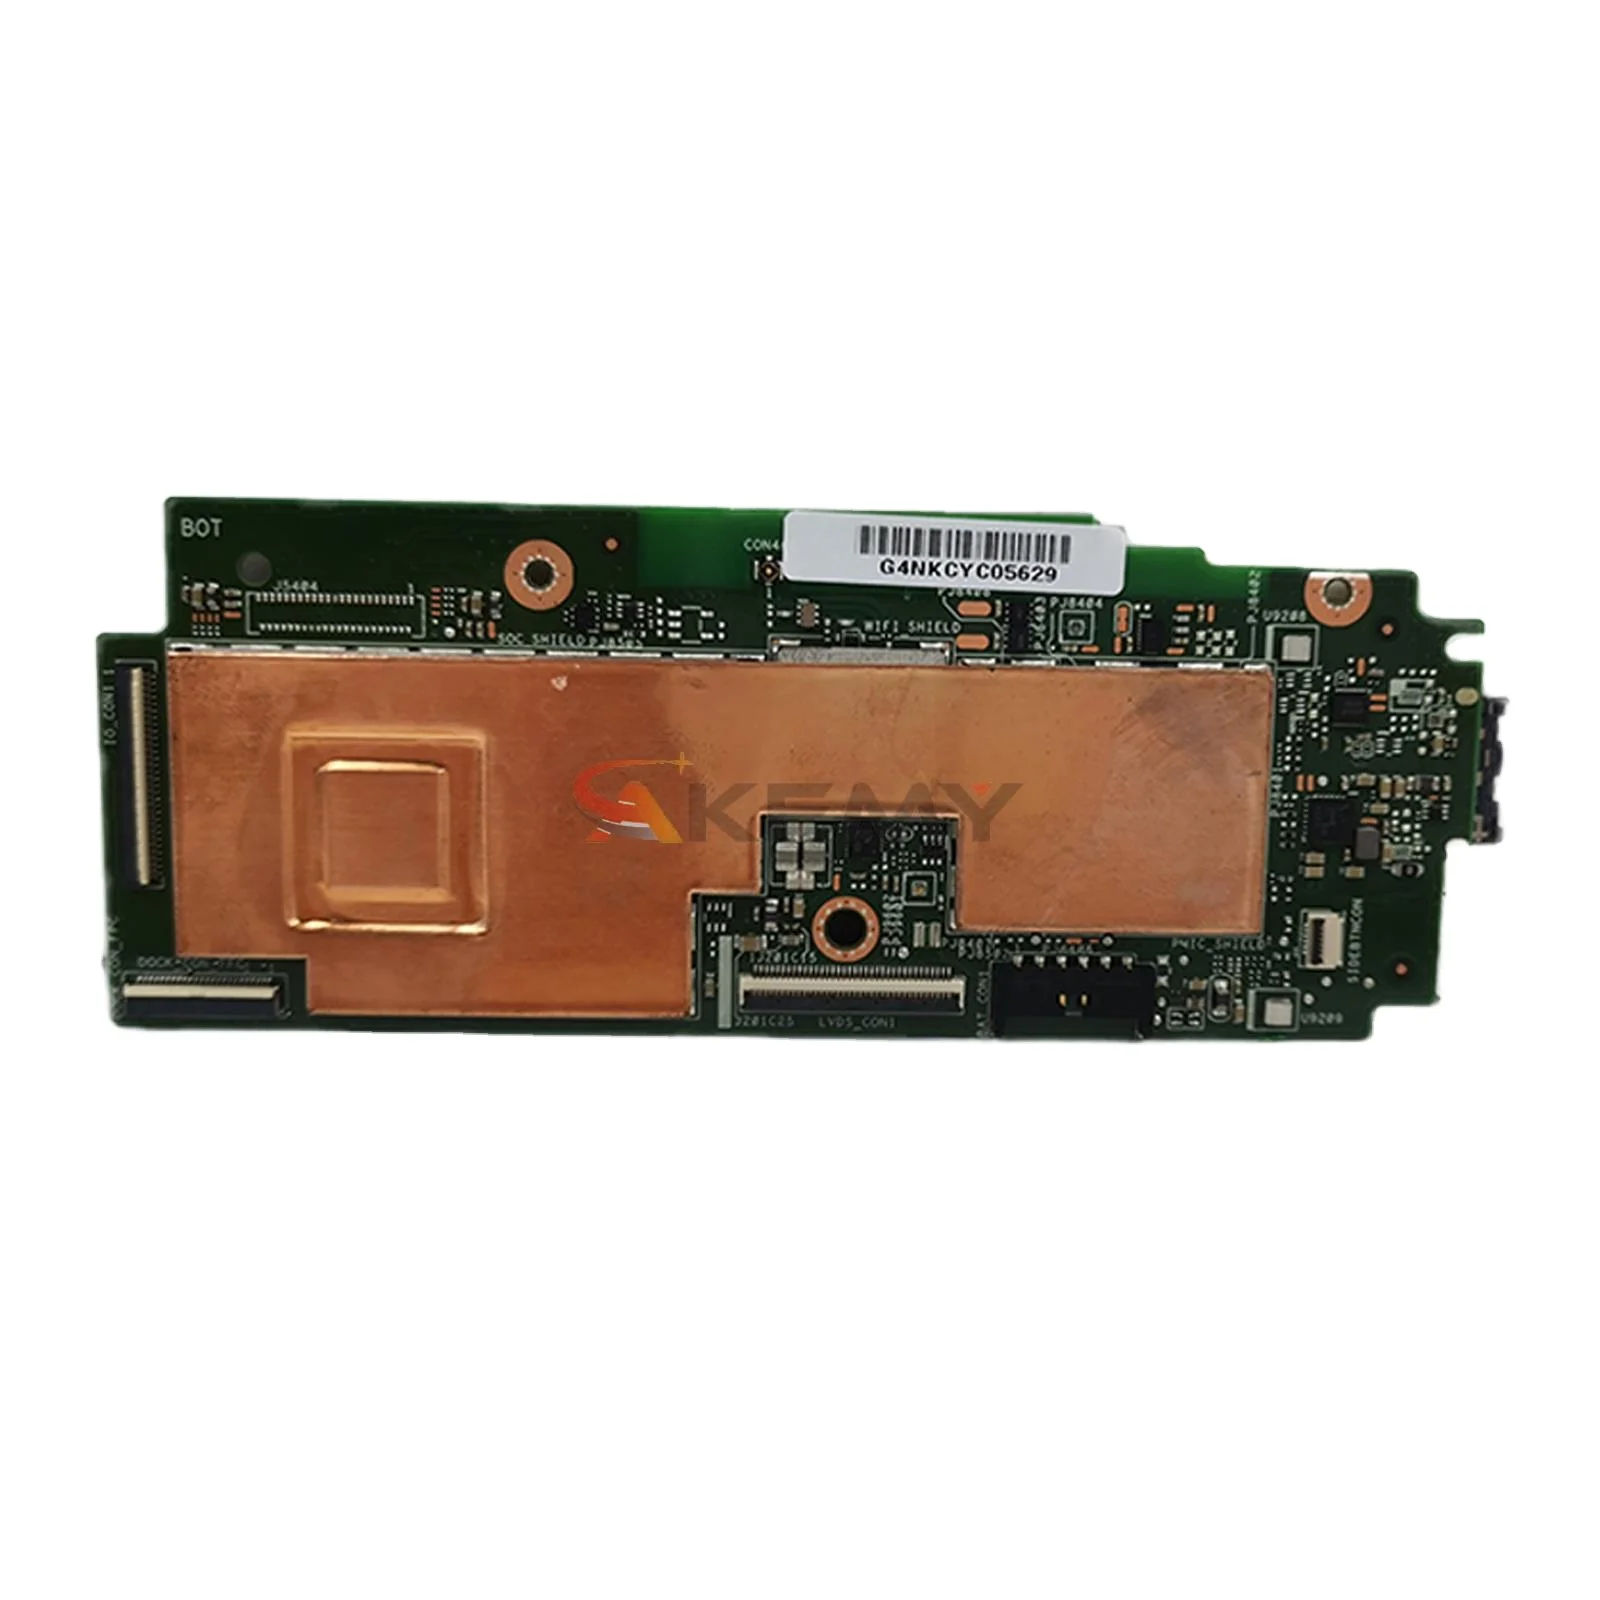 

Motherboard Work fine 100% test 60NK0100 K010 for ASUS TF103C me103cg TRANSFORMER PAD System Board Motherboard 16GB